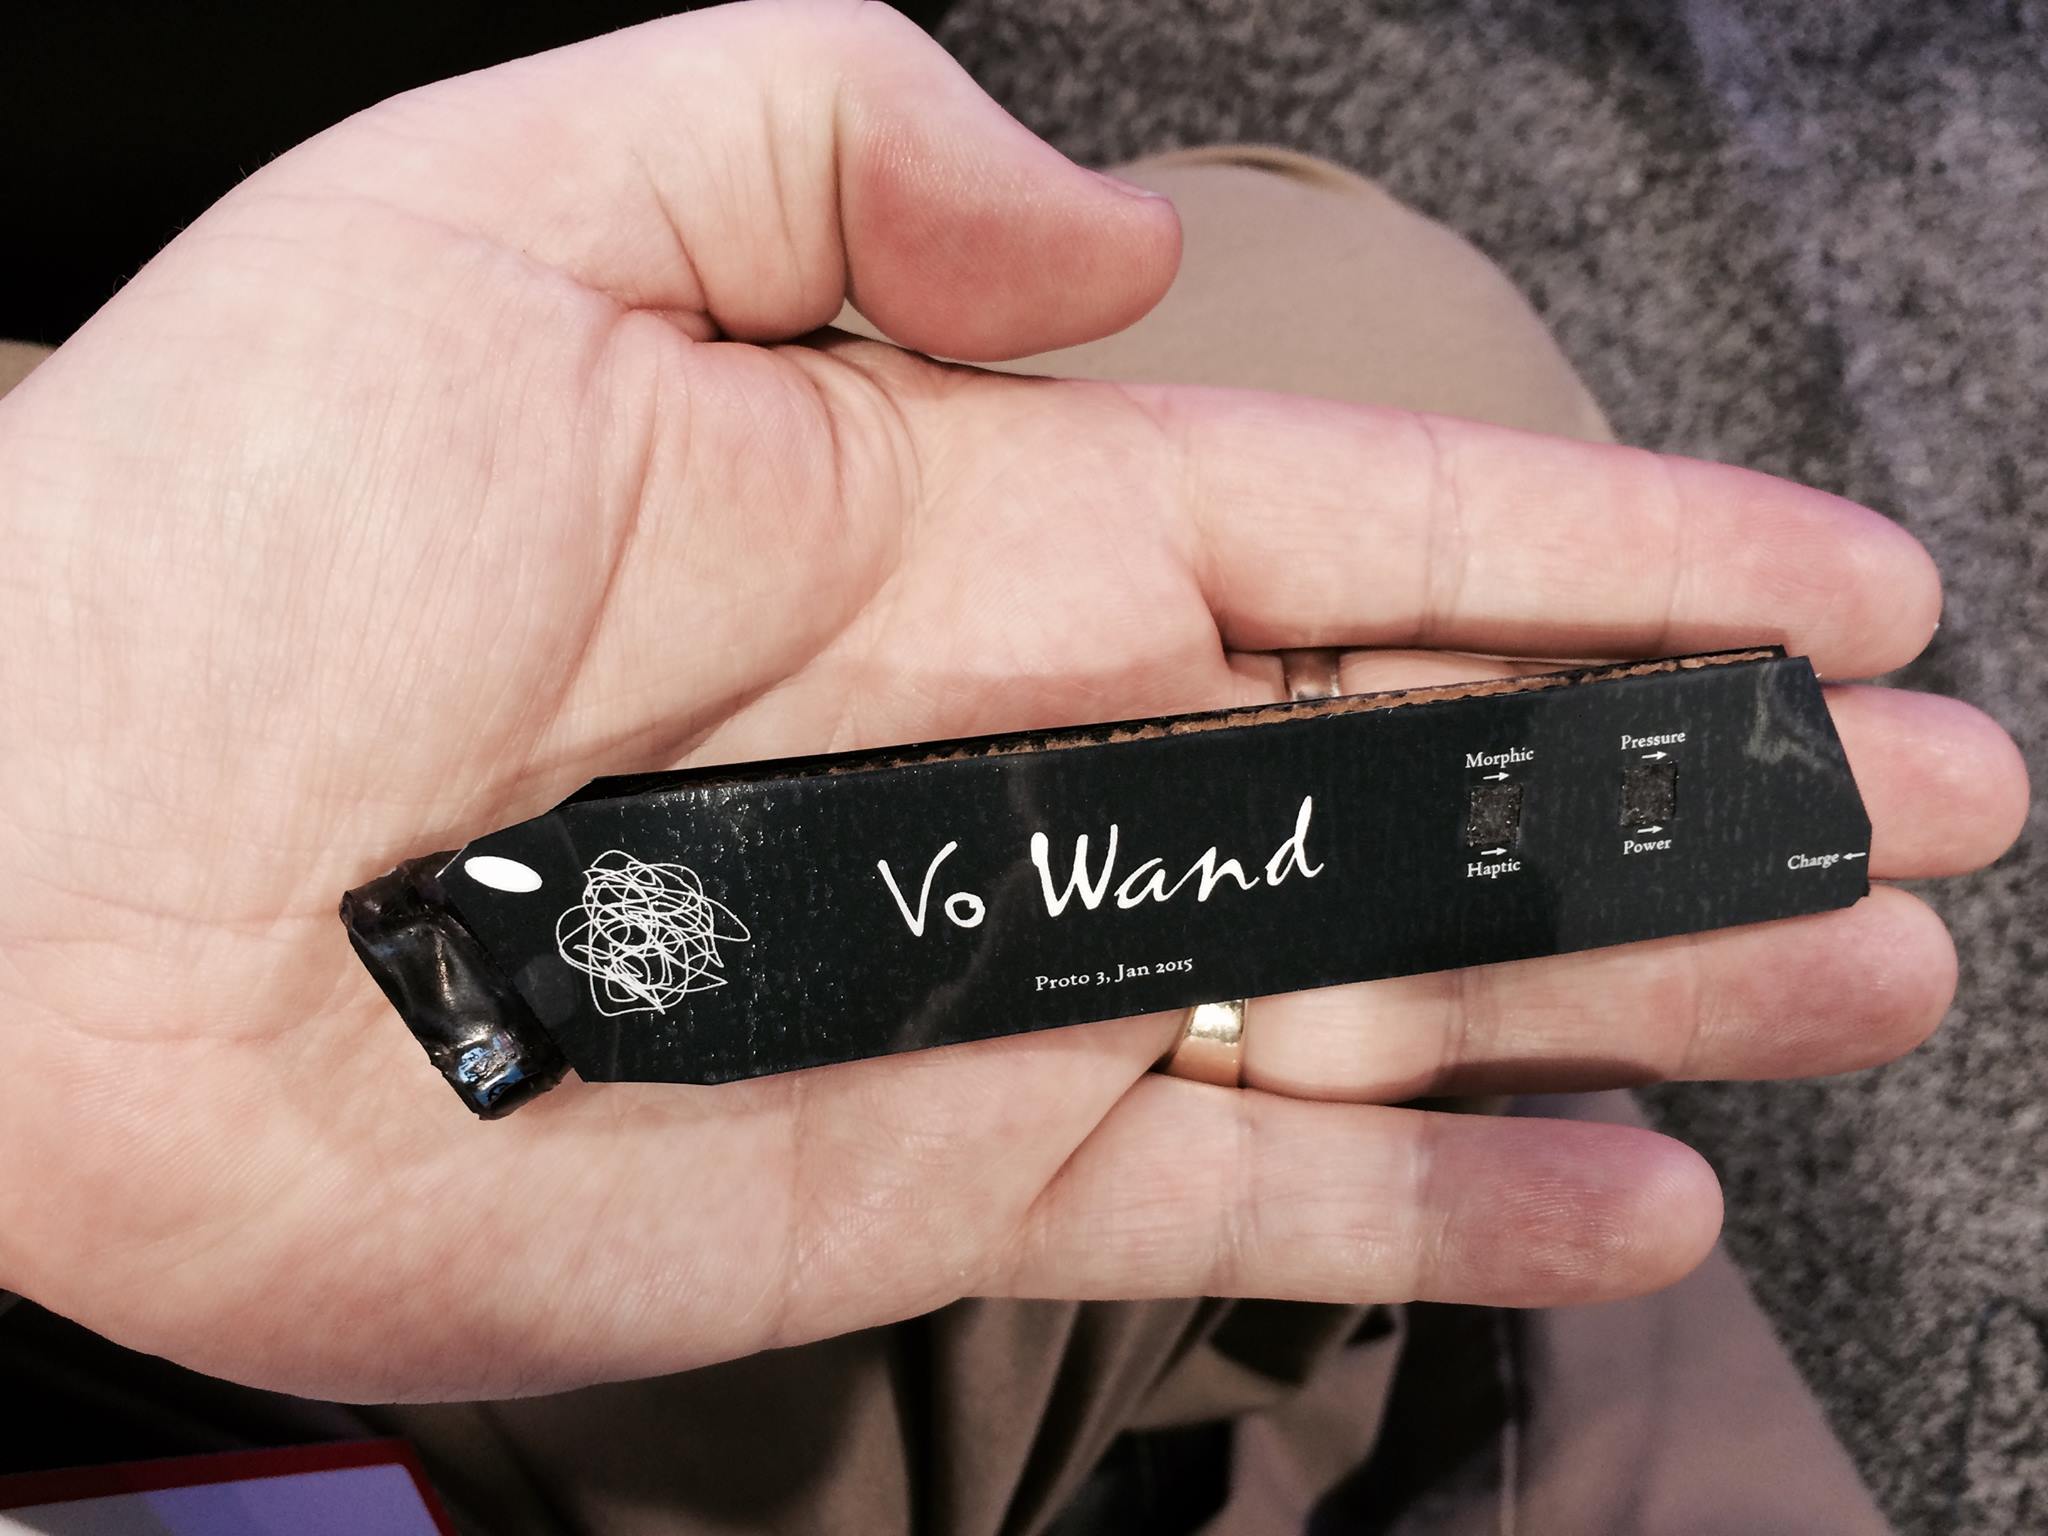 Paul Vo’s Physics Defying Wand Makes Guitars Sound Entirely Different